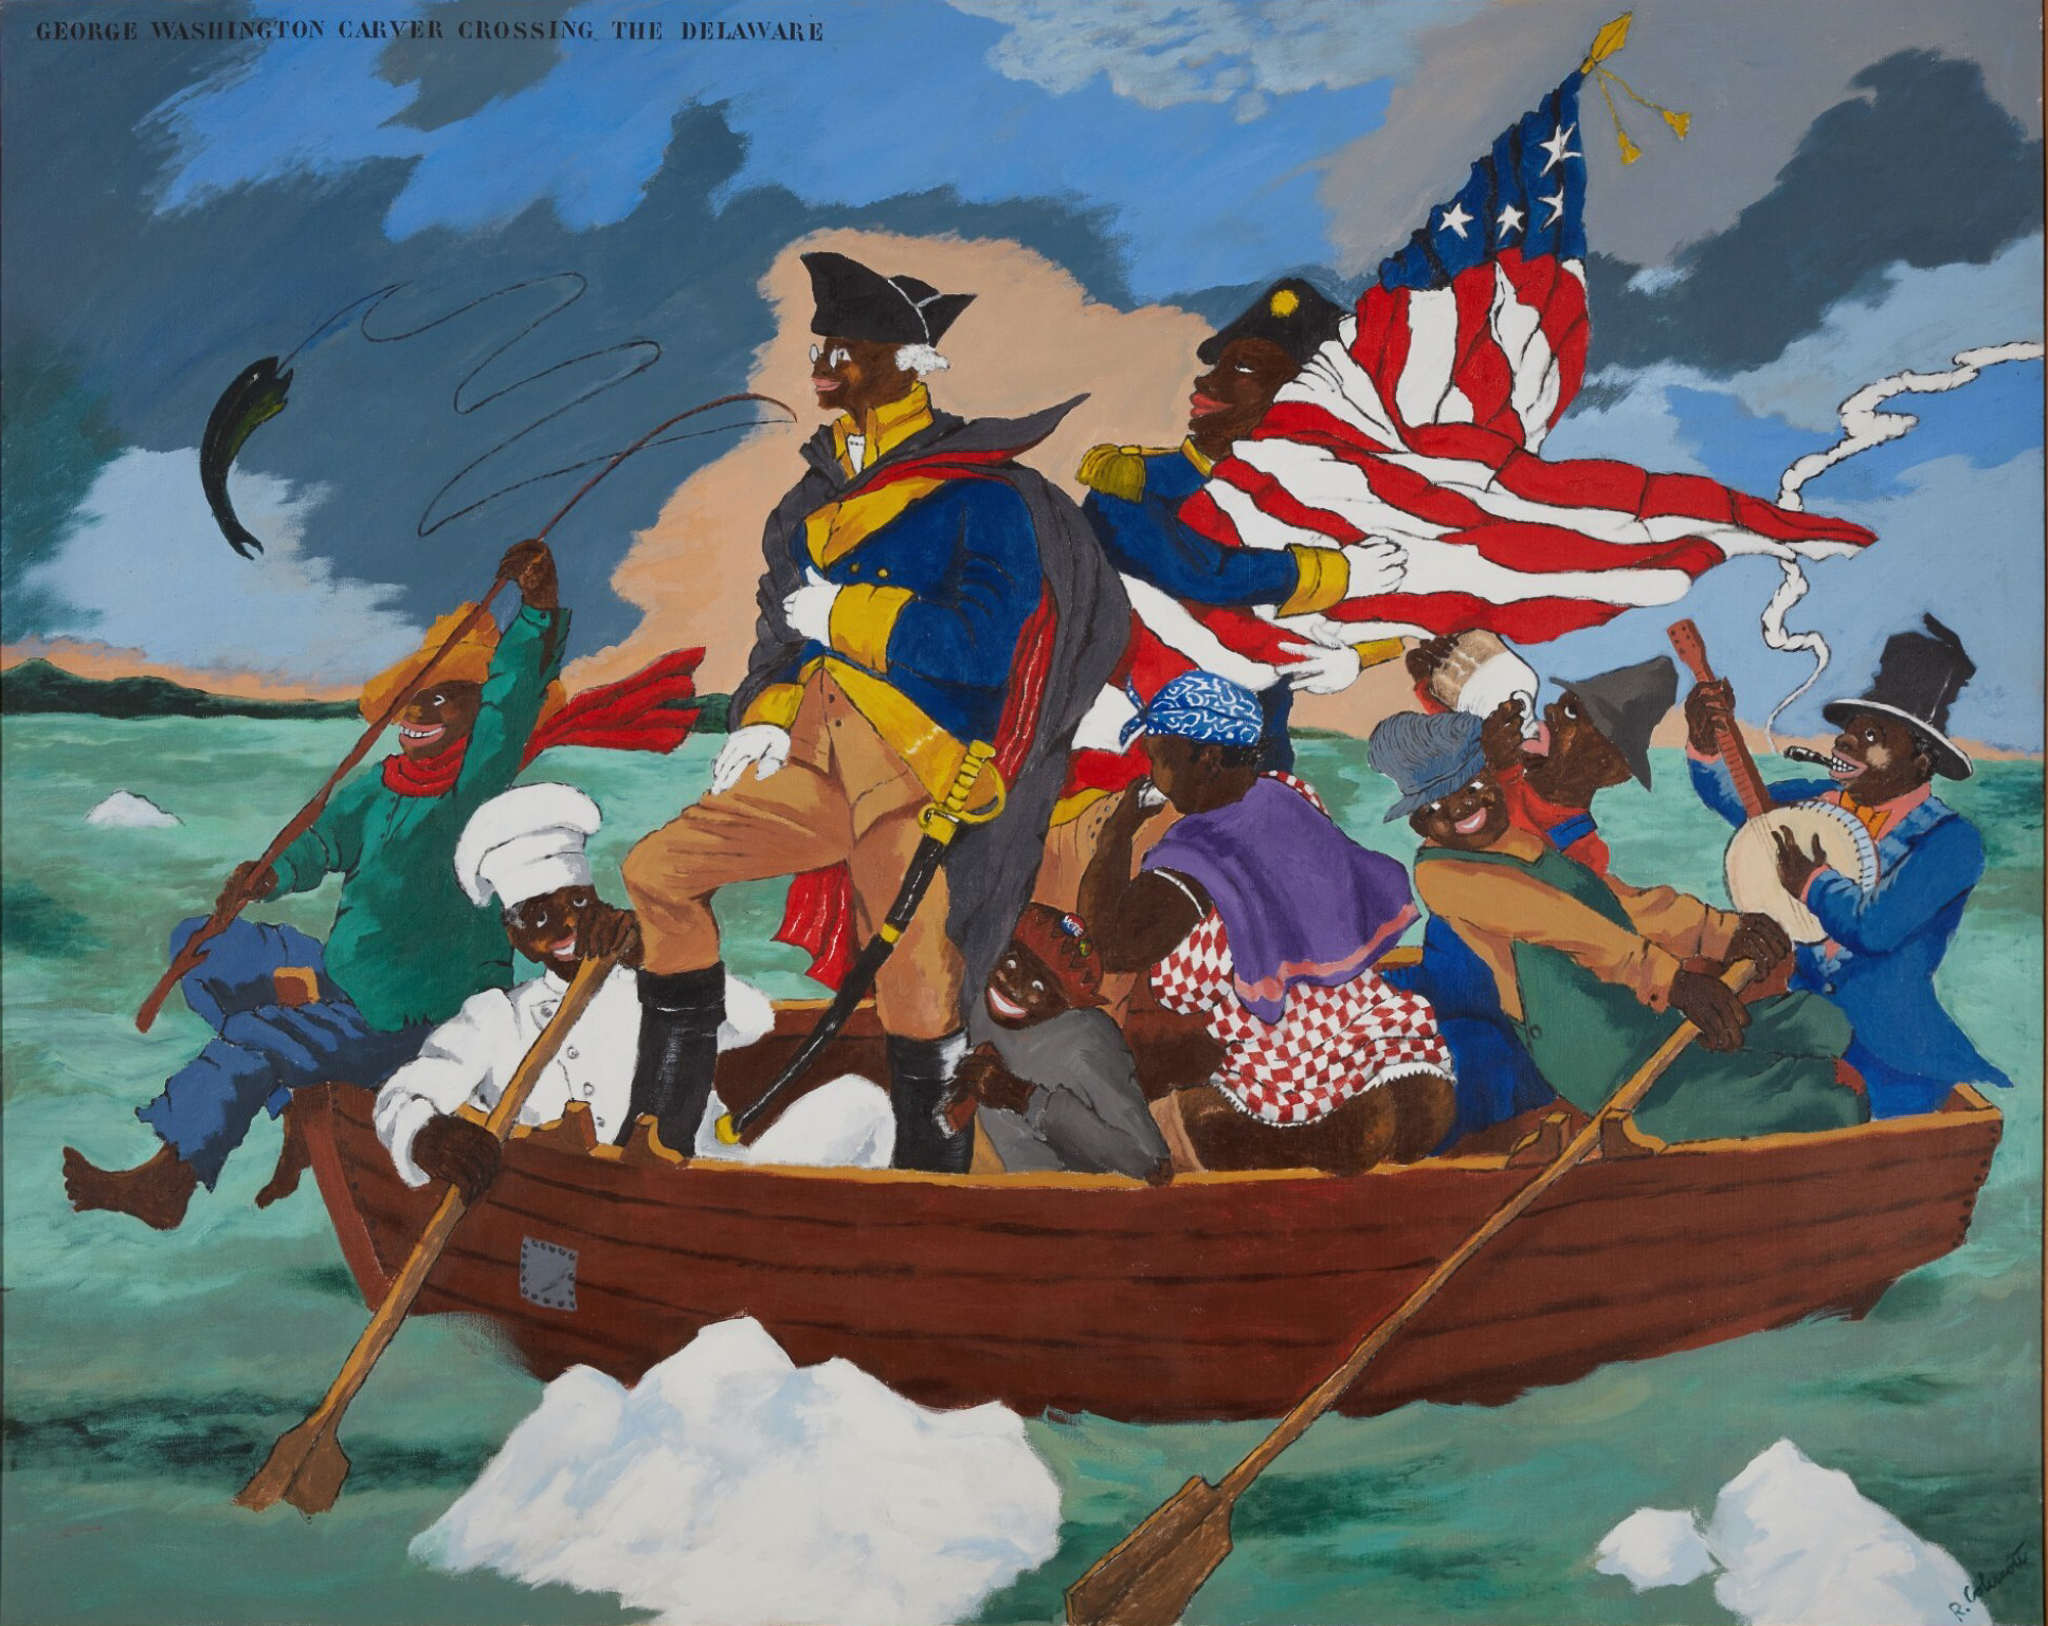 George Washington Carver Crossing the Delaware: Page from an American History Textbook, 1975